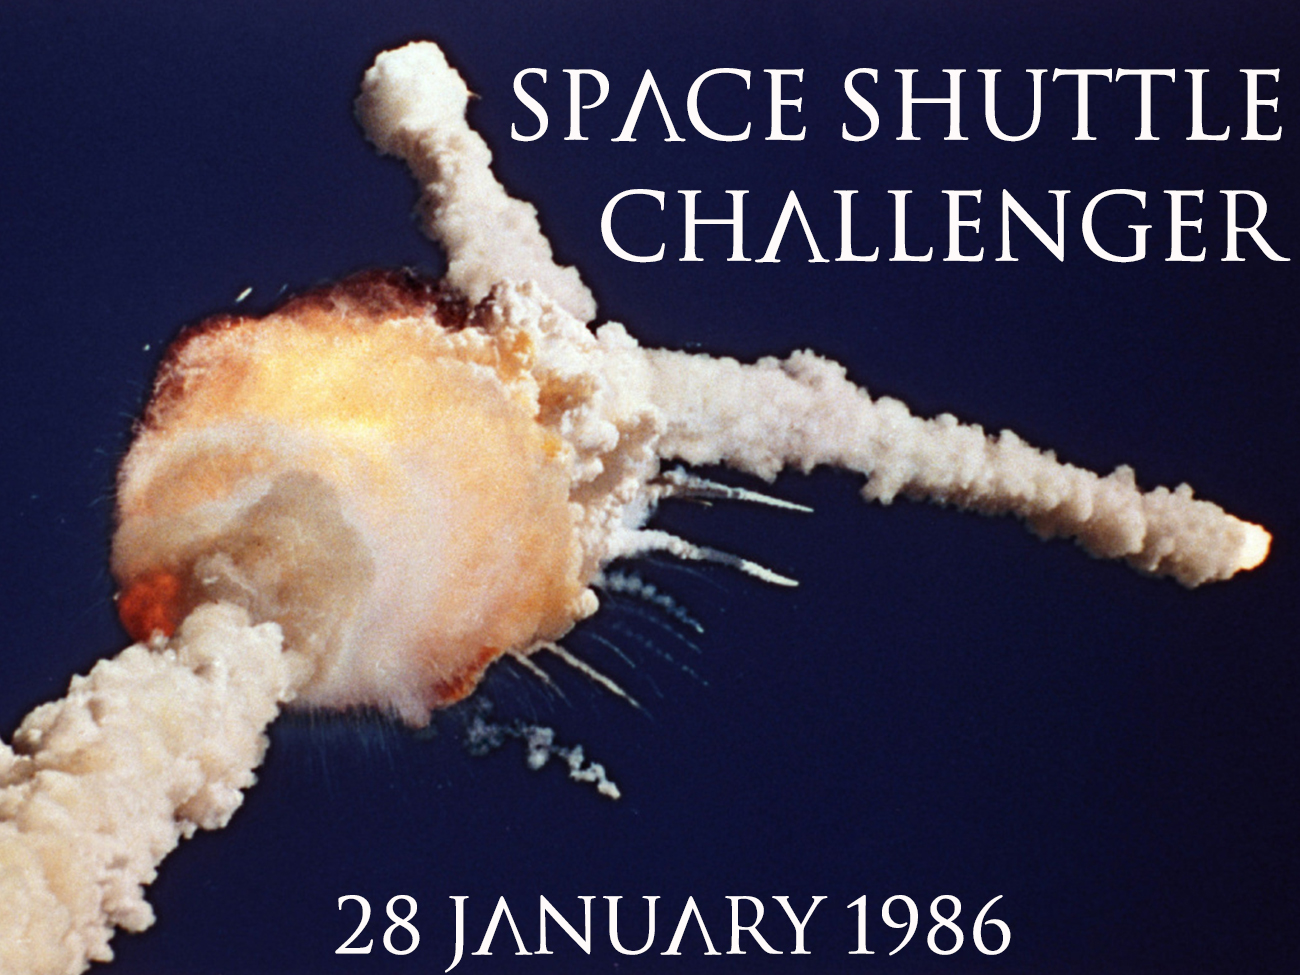 new information on challenger space shuttle